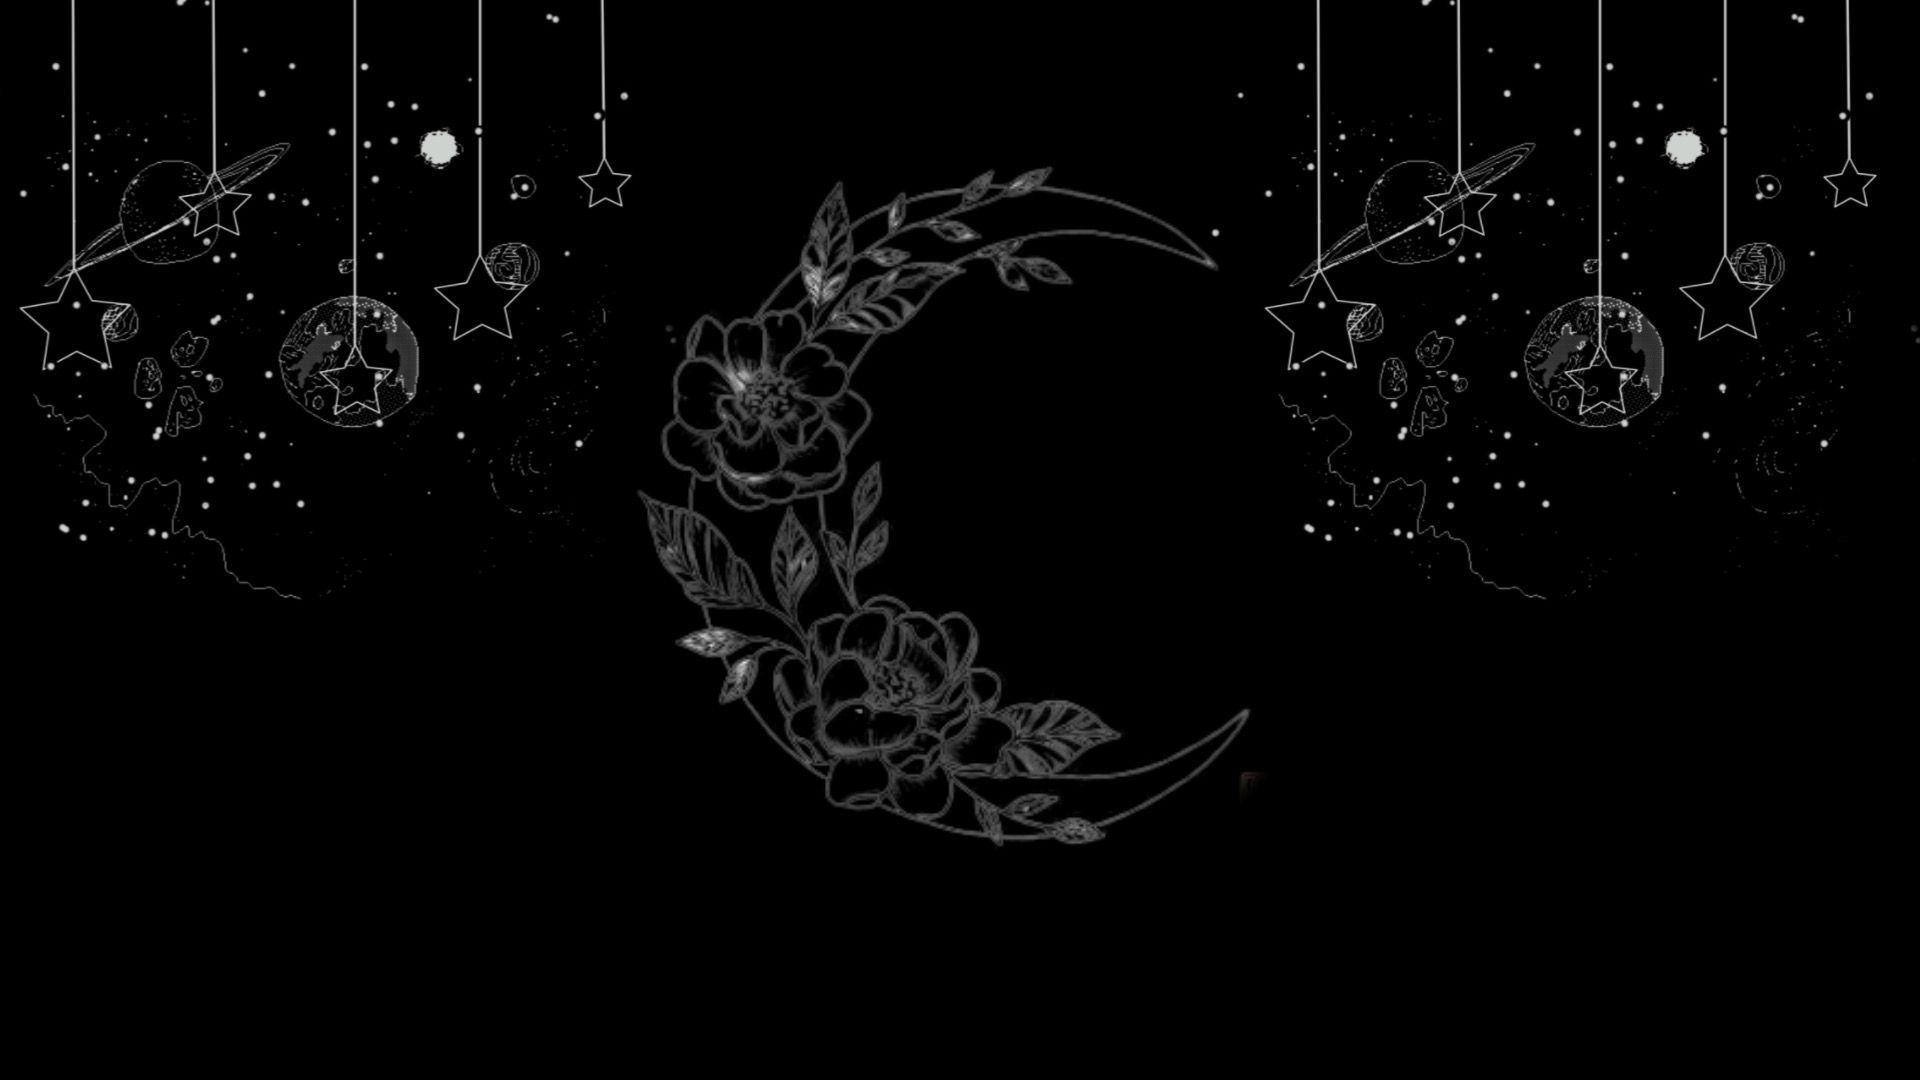 Moon and Stars. Desktop wallpaper black, Witchy wallpaper, Cute laptop wallpaper